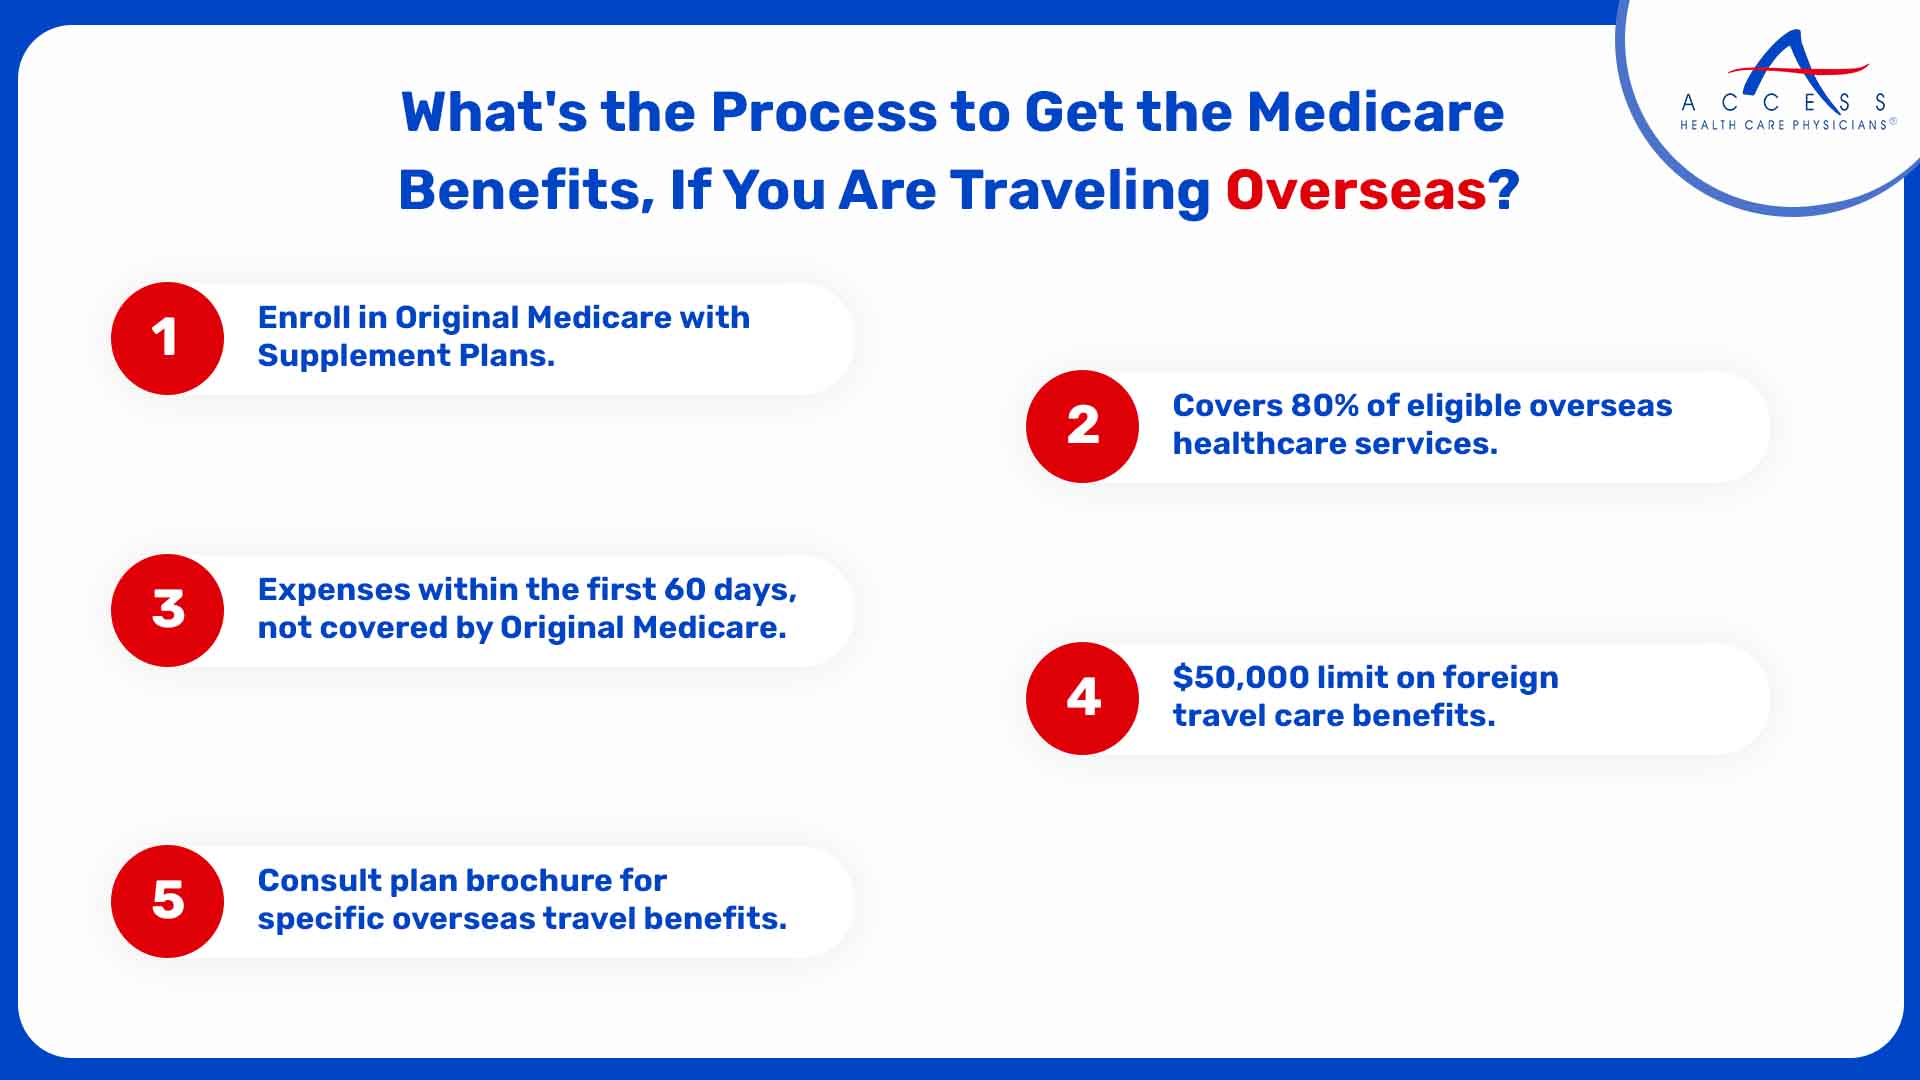 What's the Process to Get the Medicare Benefits, If You Are Traveling Overseas?